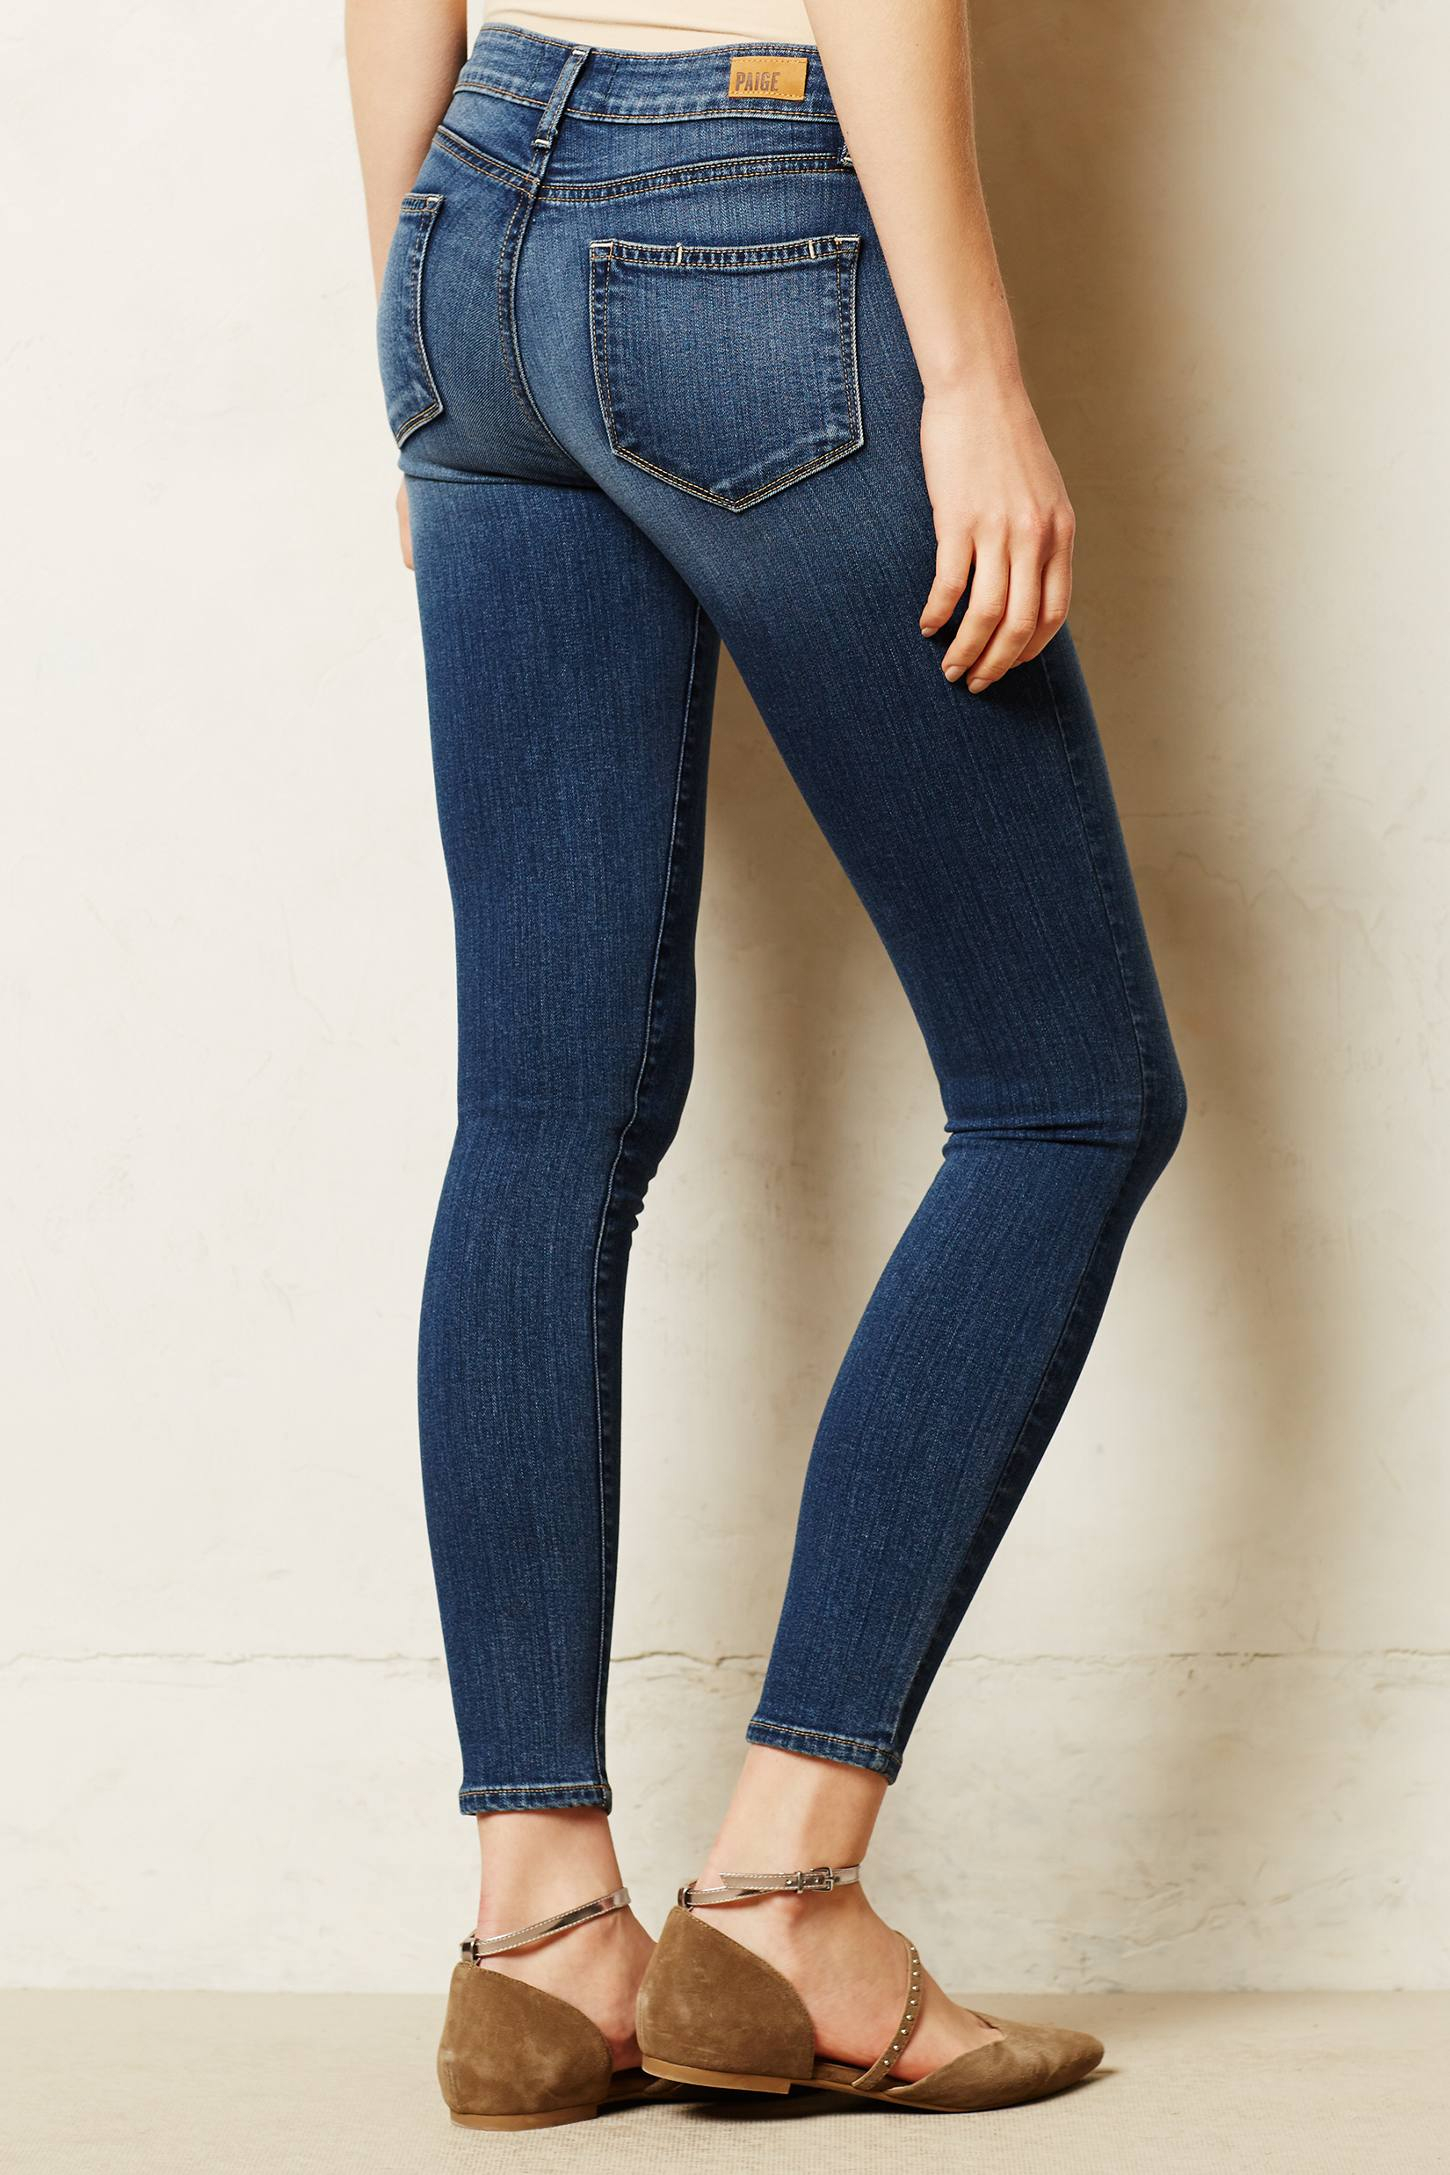 Lyst - Paige Verdugo Ankle Skinny Jeans in Blue